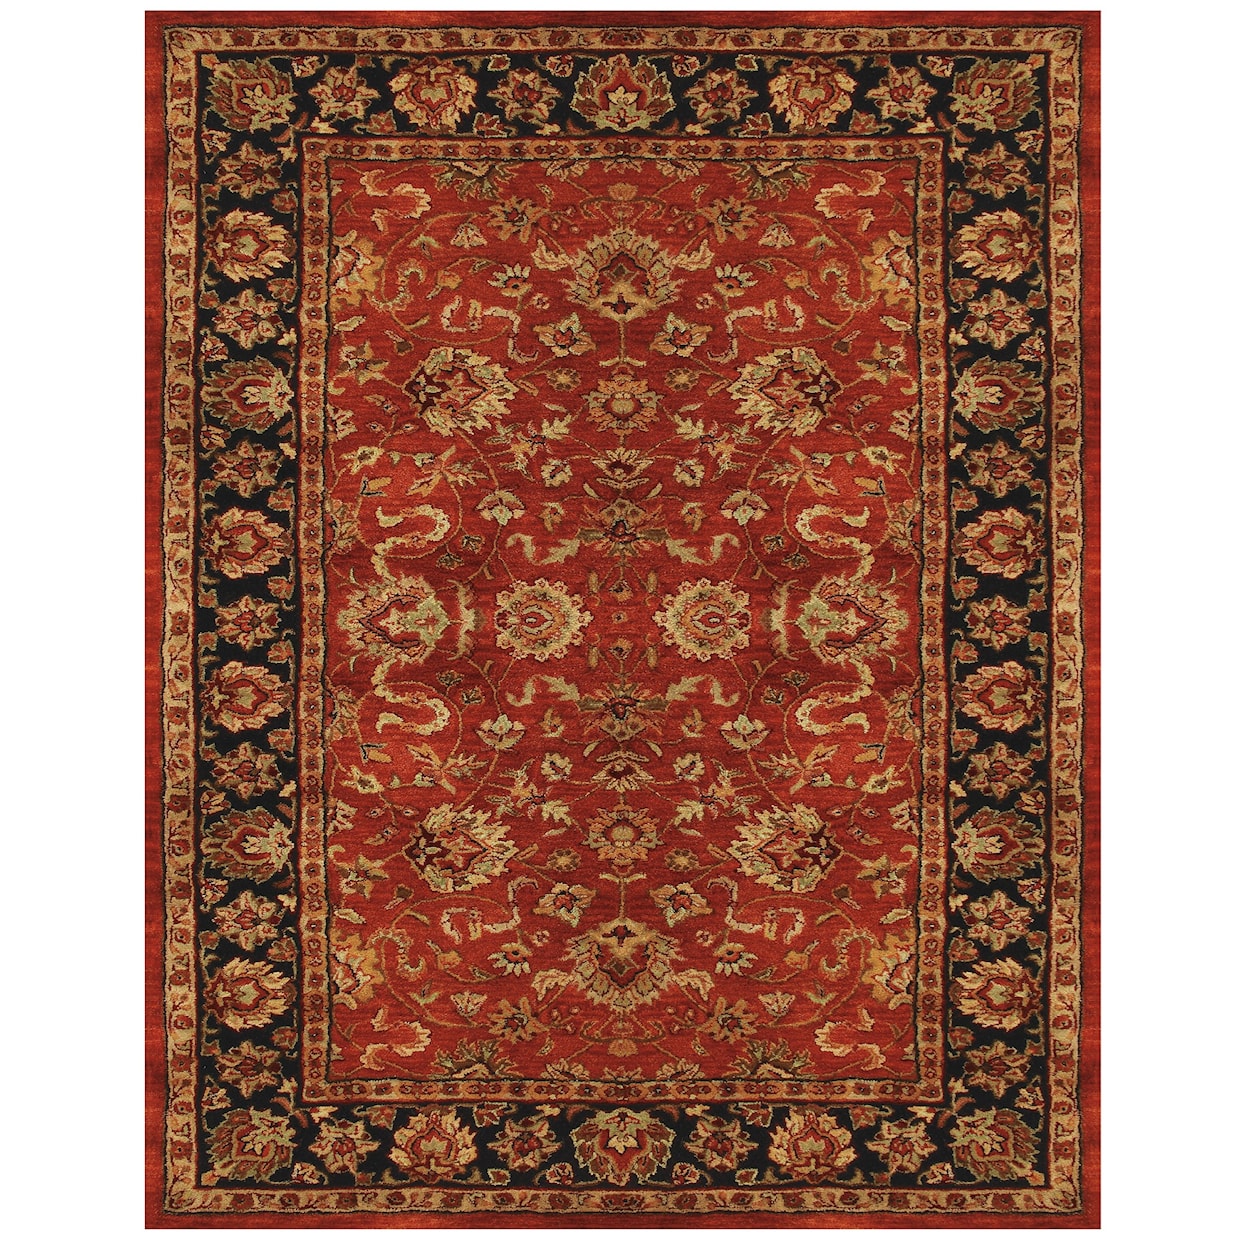 Feizy Rugs Alexandra Red/Navy 5' x 8' Area Rug